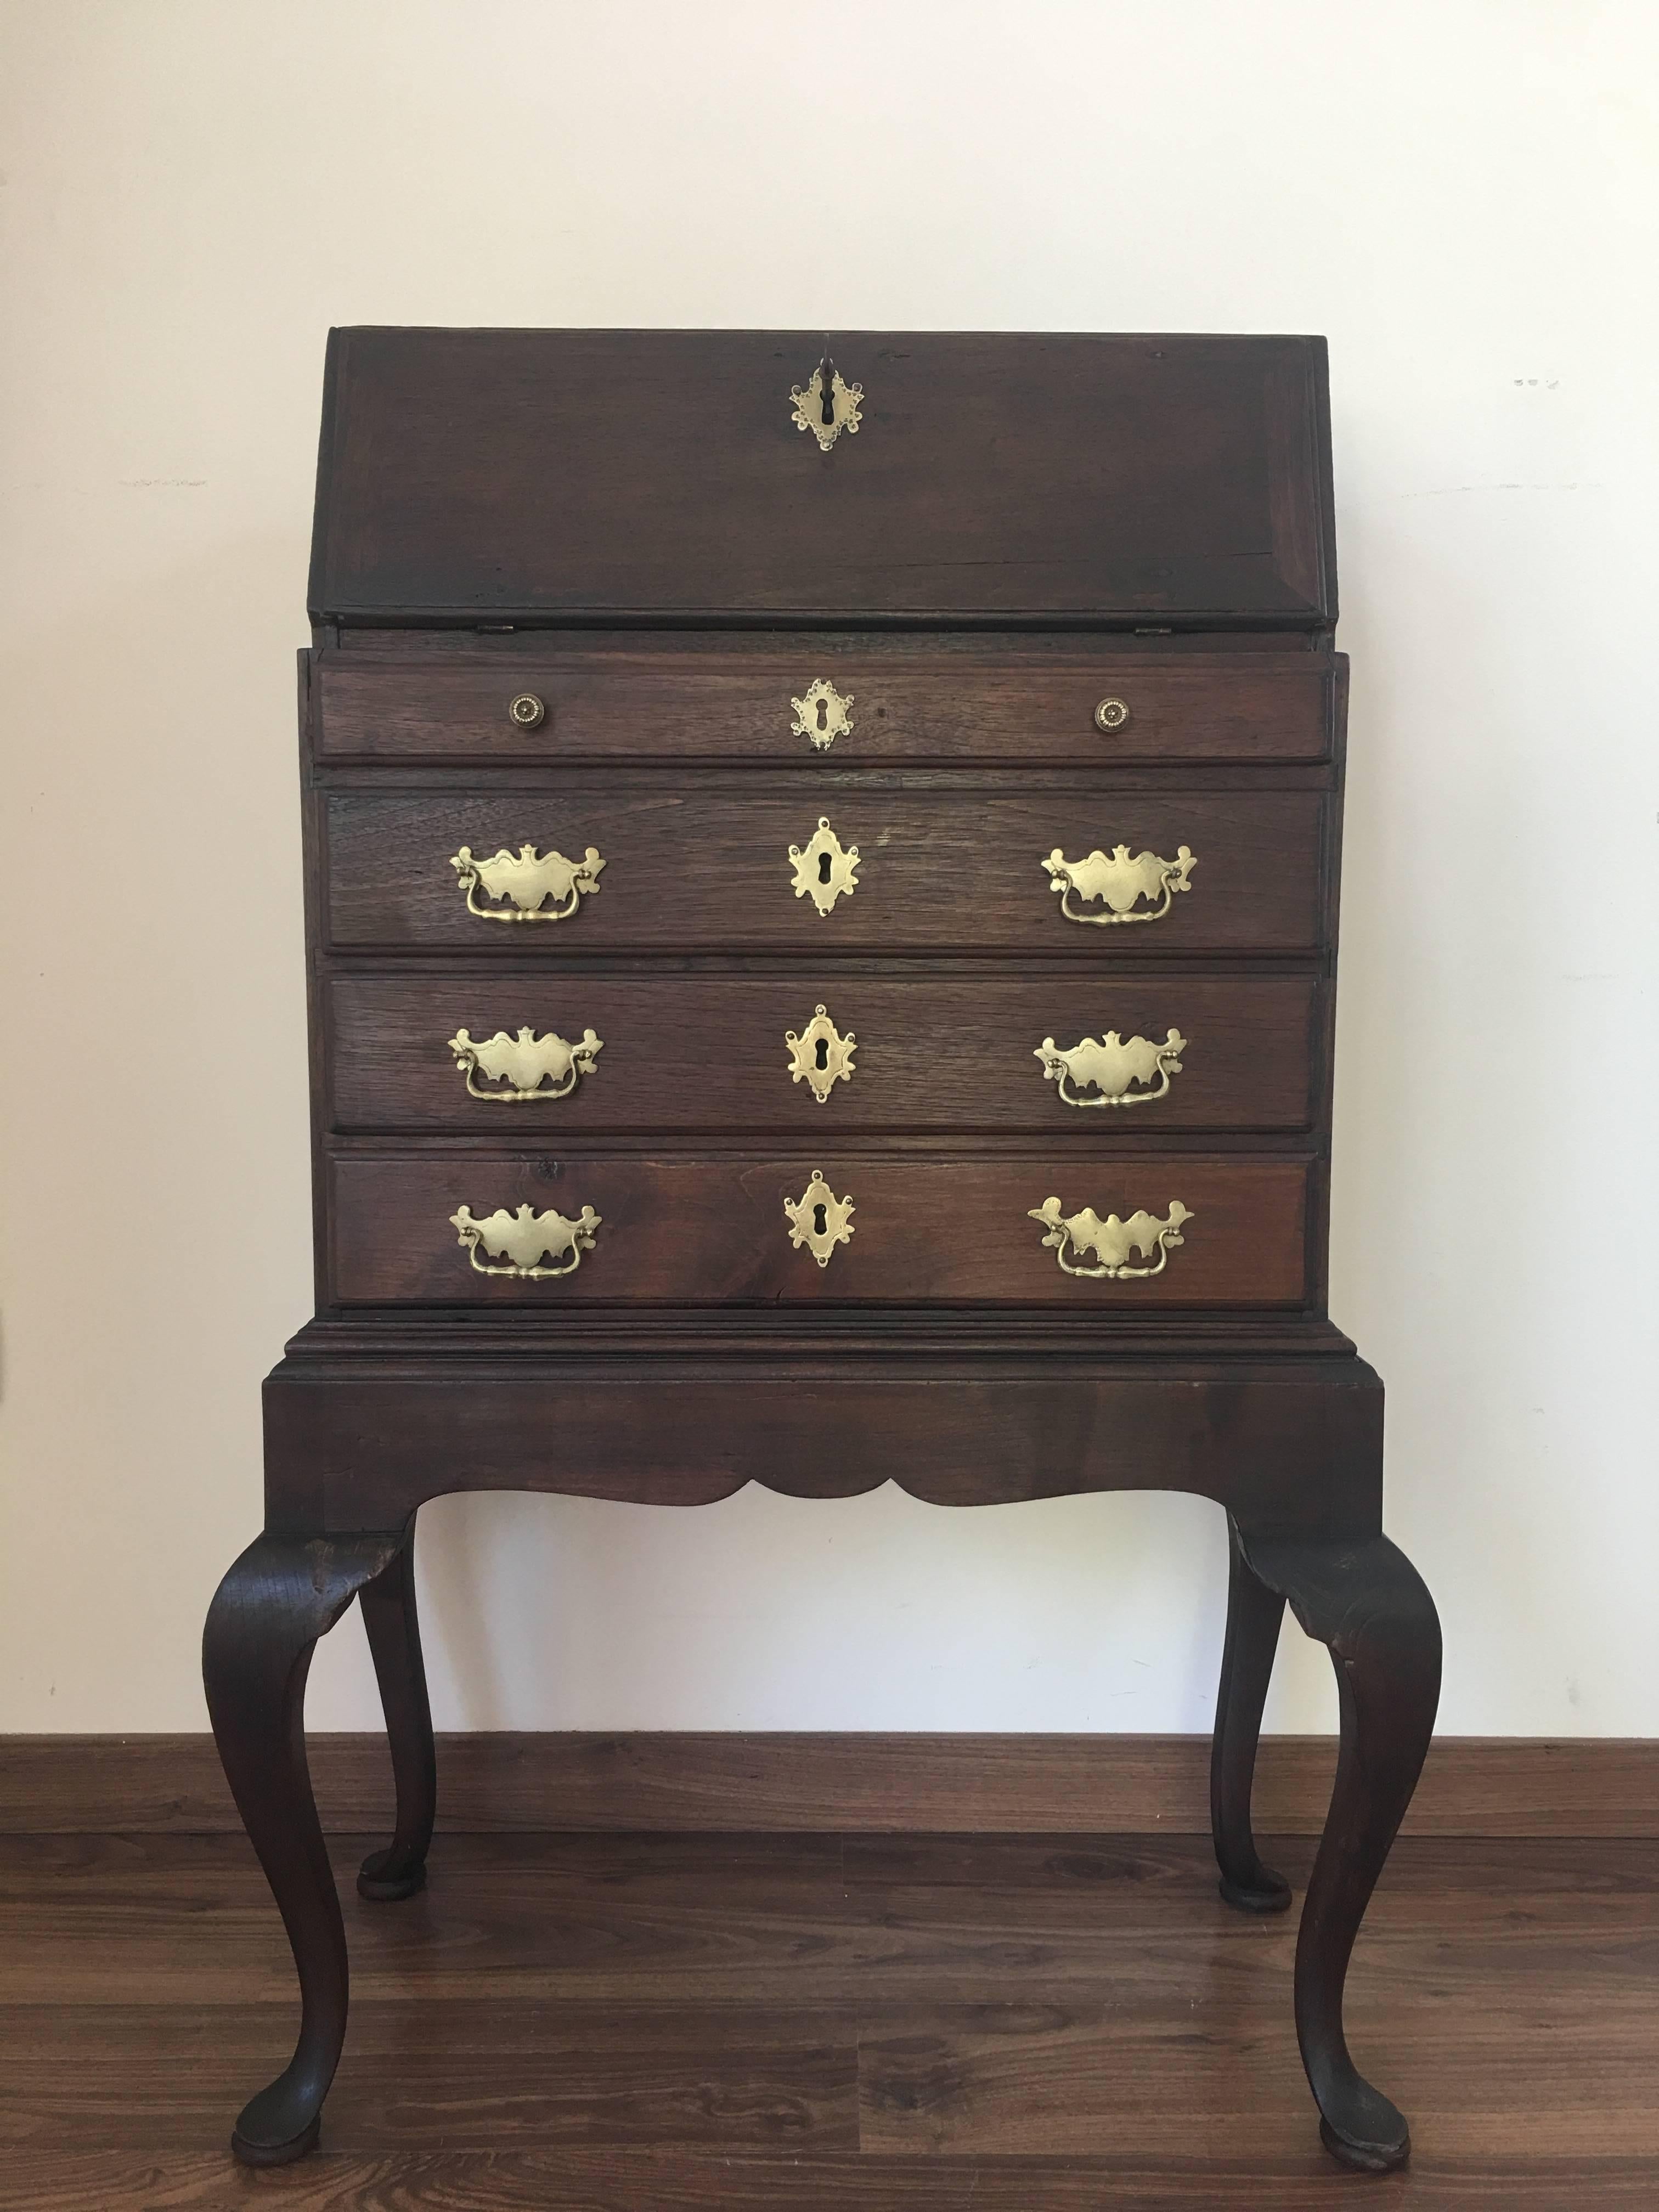 Early 19th century Georgian style walnut and burr secretary desk, vanity or chest with four drawers and two interior drawers in the desk.
